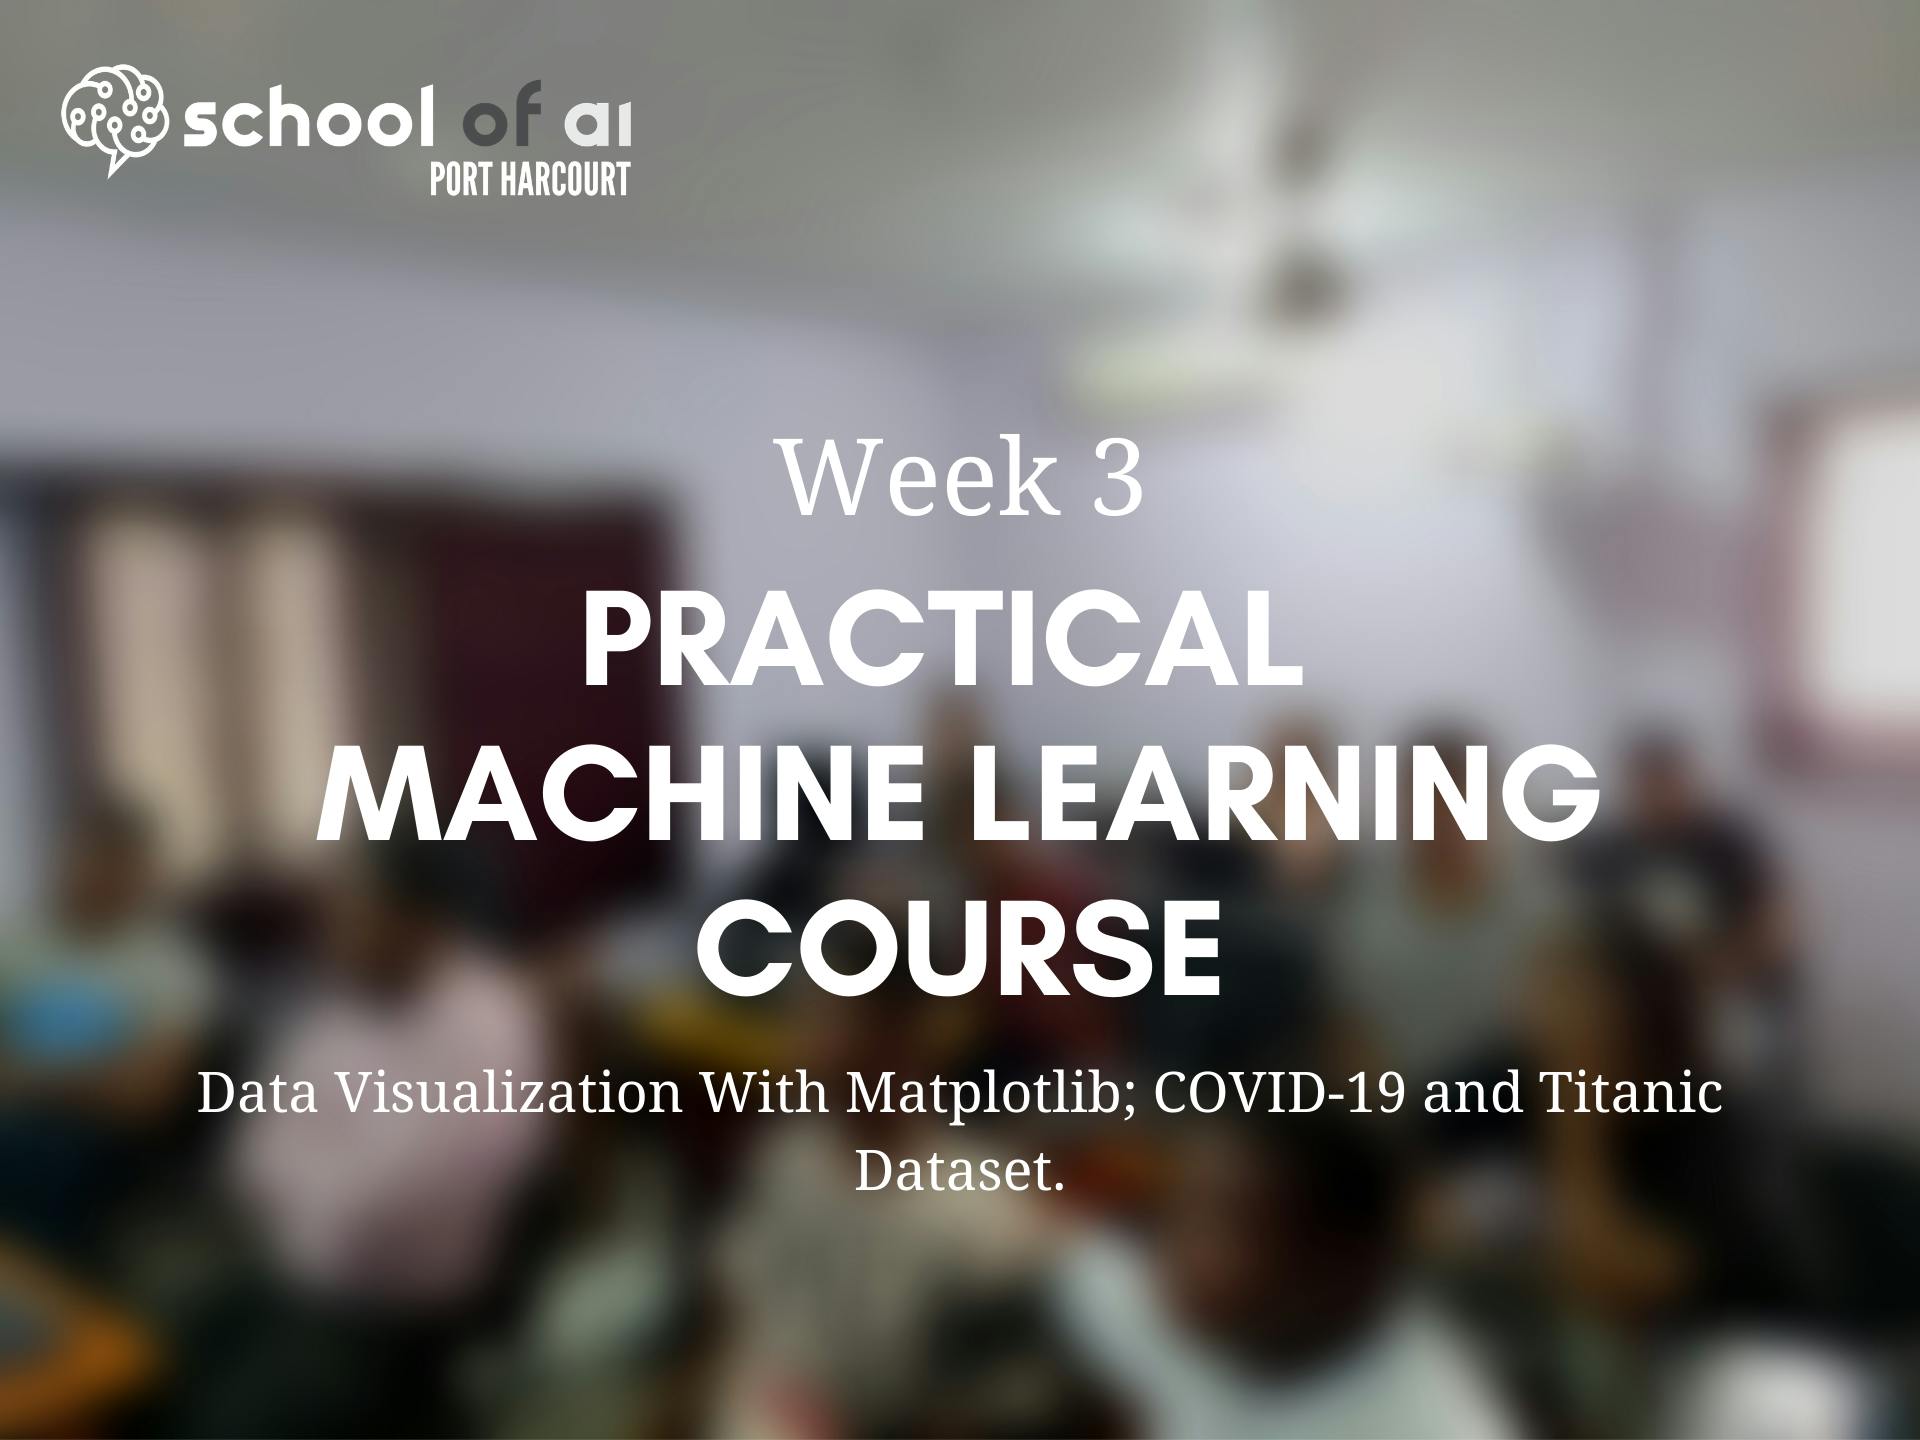 Week 3 Practical Machine Learning Course Highlights Poster